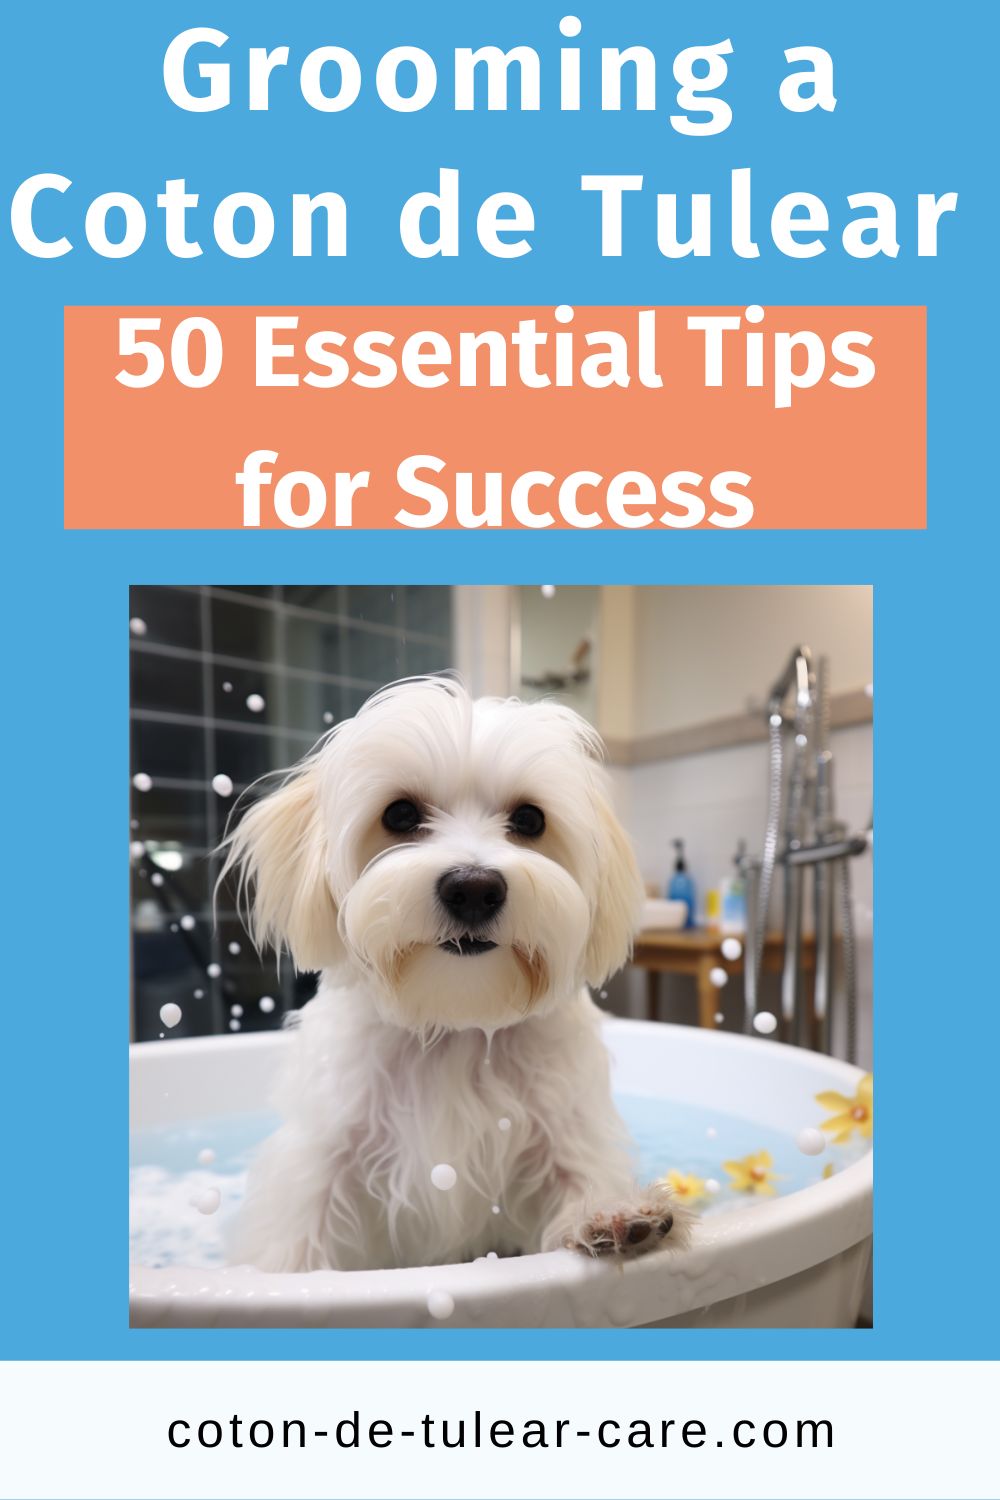 Grooming a Coton de Tulear doesn’t have to be challenging if you’re armed with the right information and tools. These tips will make Coton grooming easier for you and your dog.